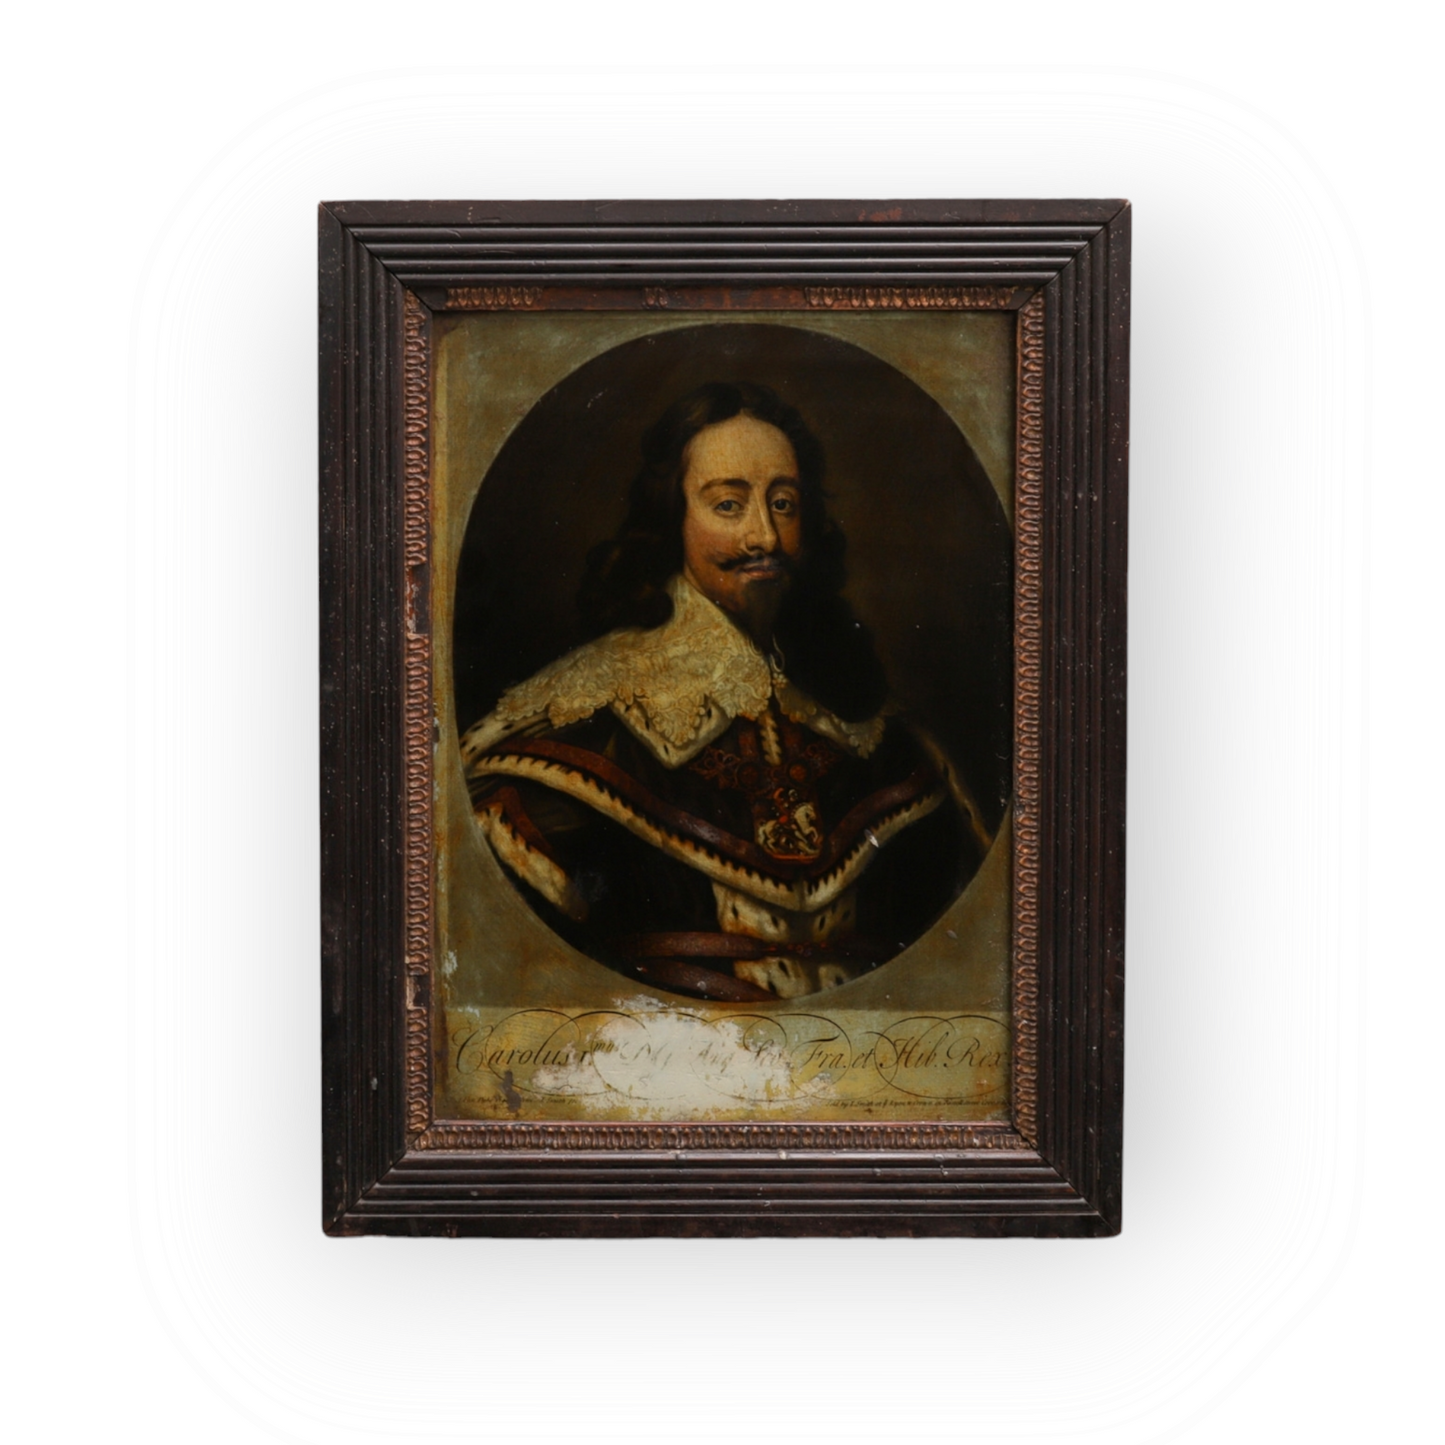 Early 18th Century English Antique Reverse Print On Glass of King Charles I, (1600-1649)